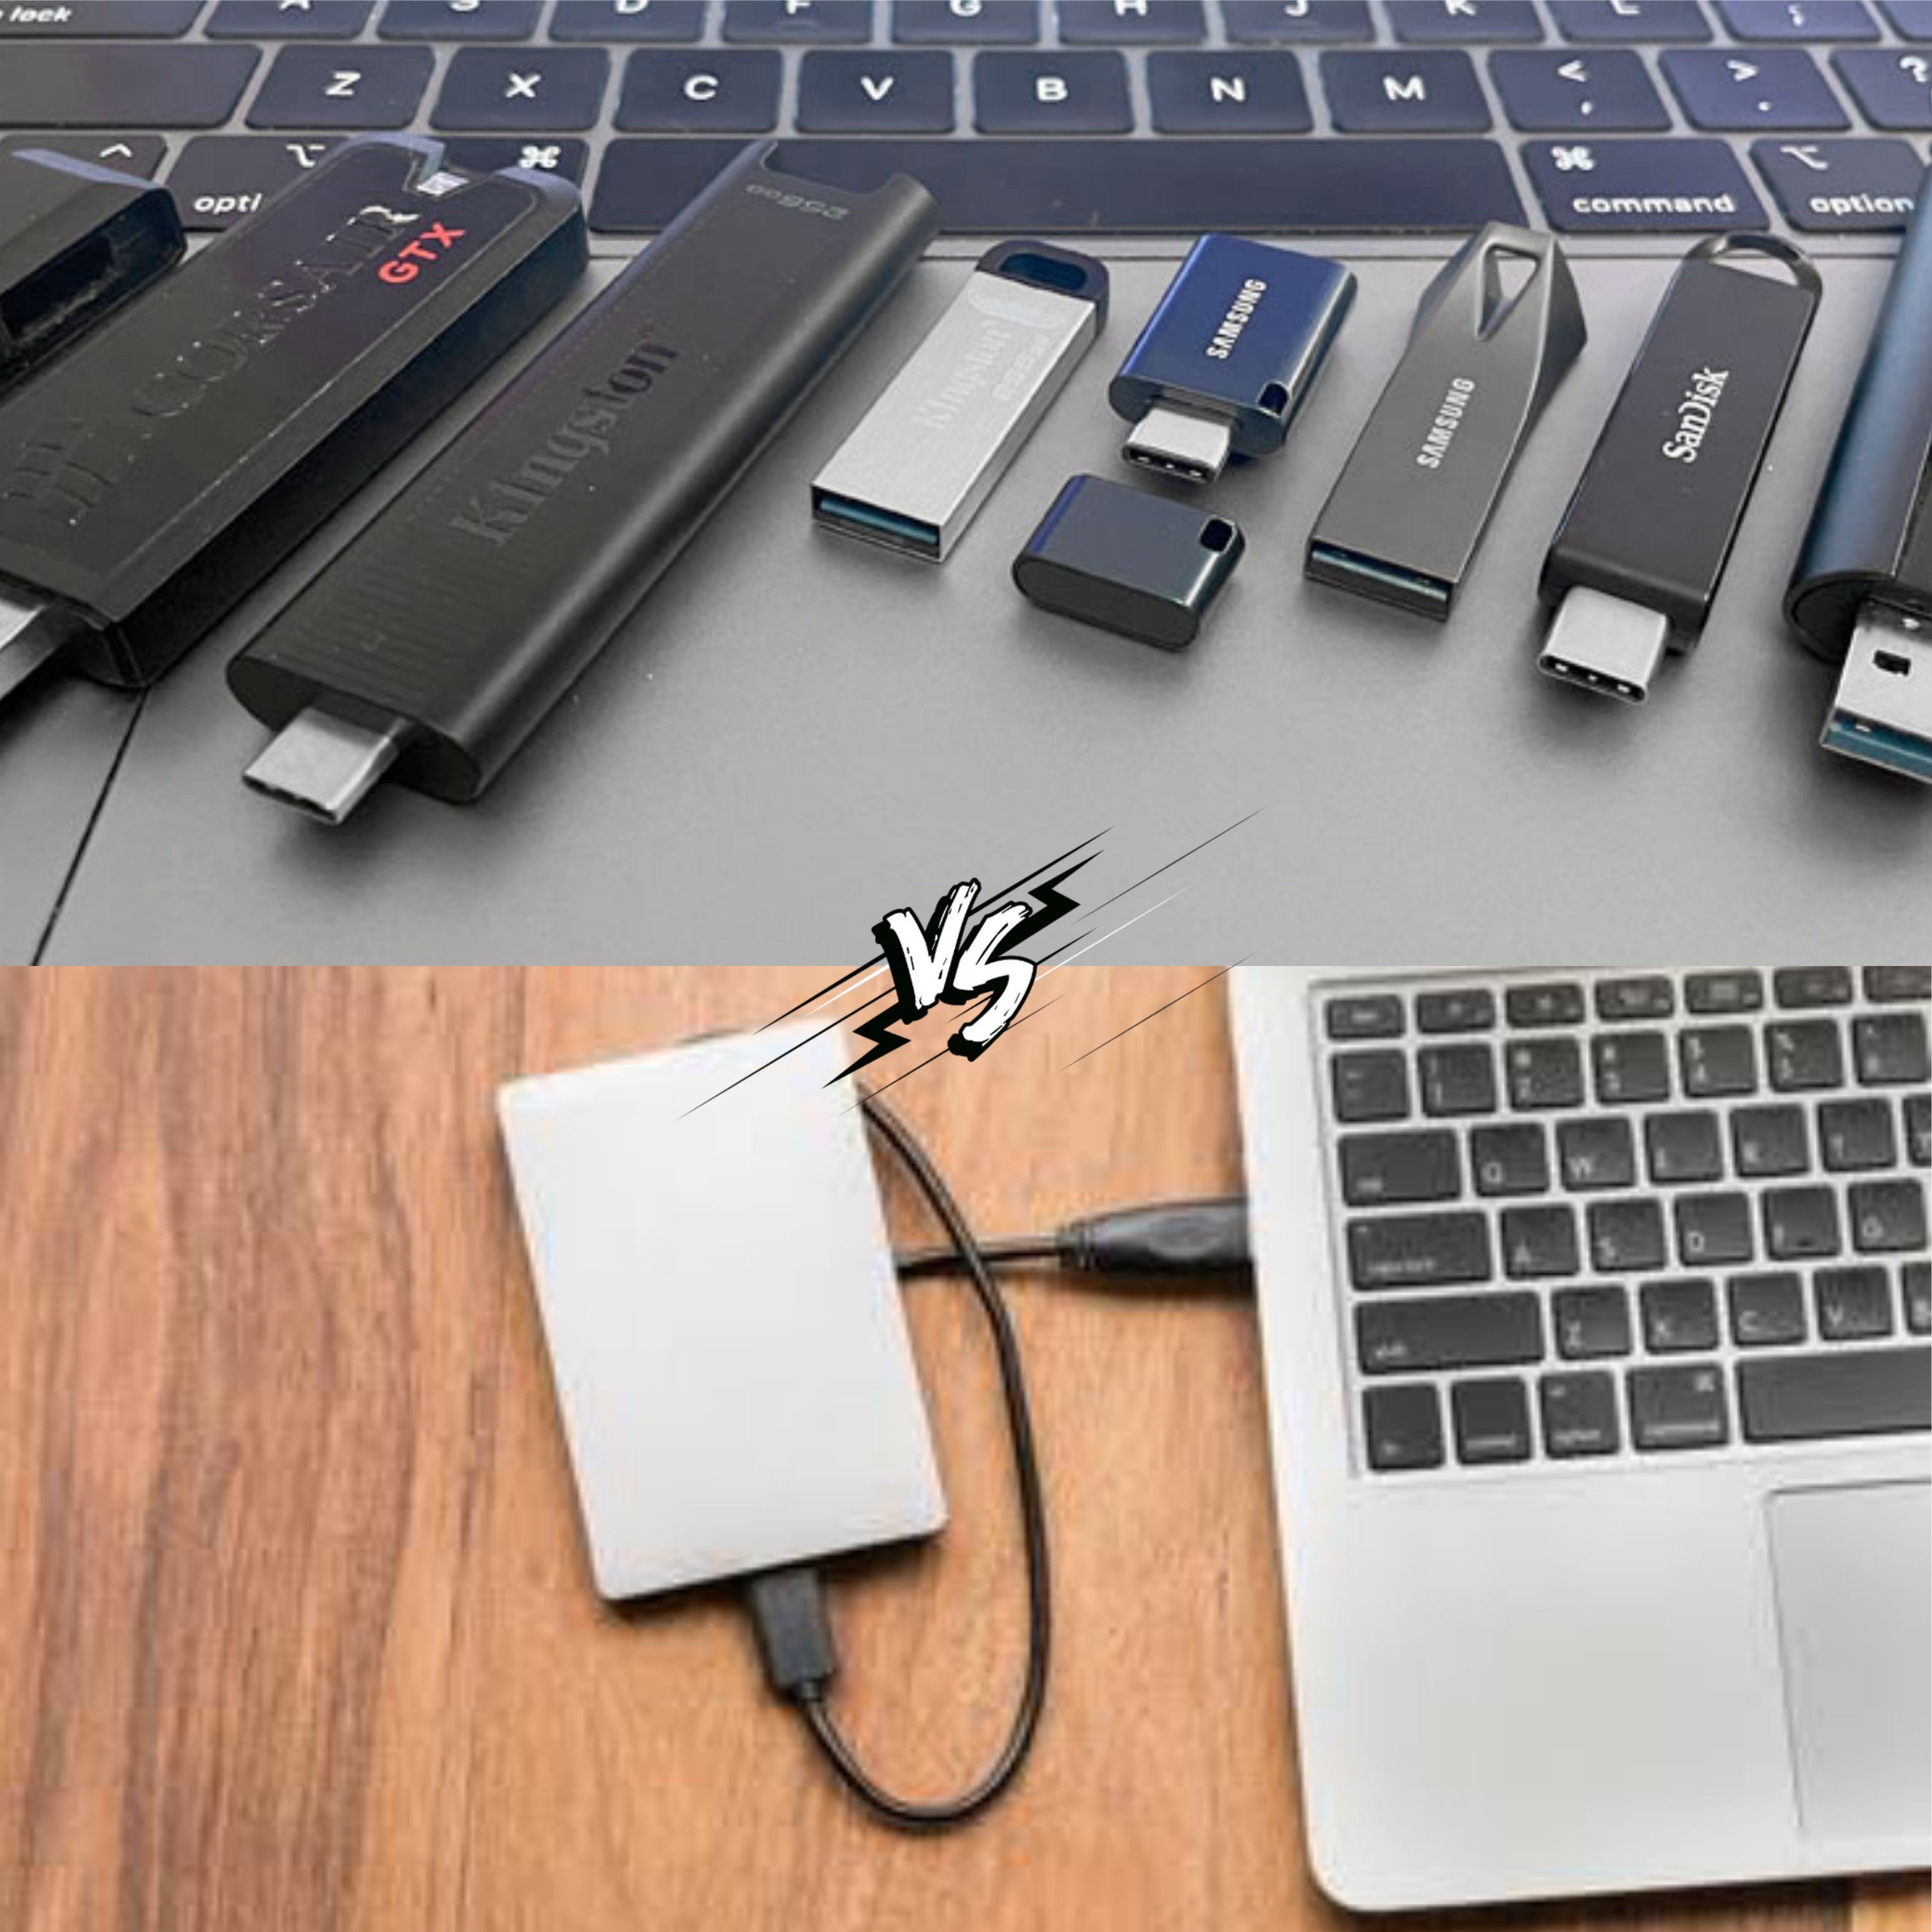 External Hard Drive vs USB Flash Drive Which Is Better?